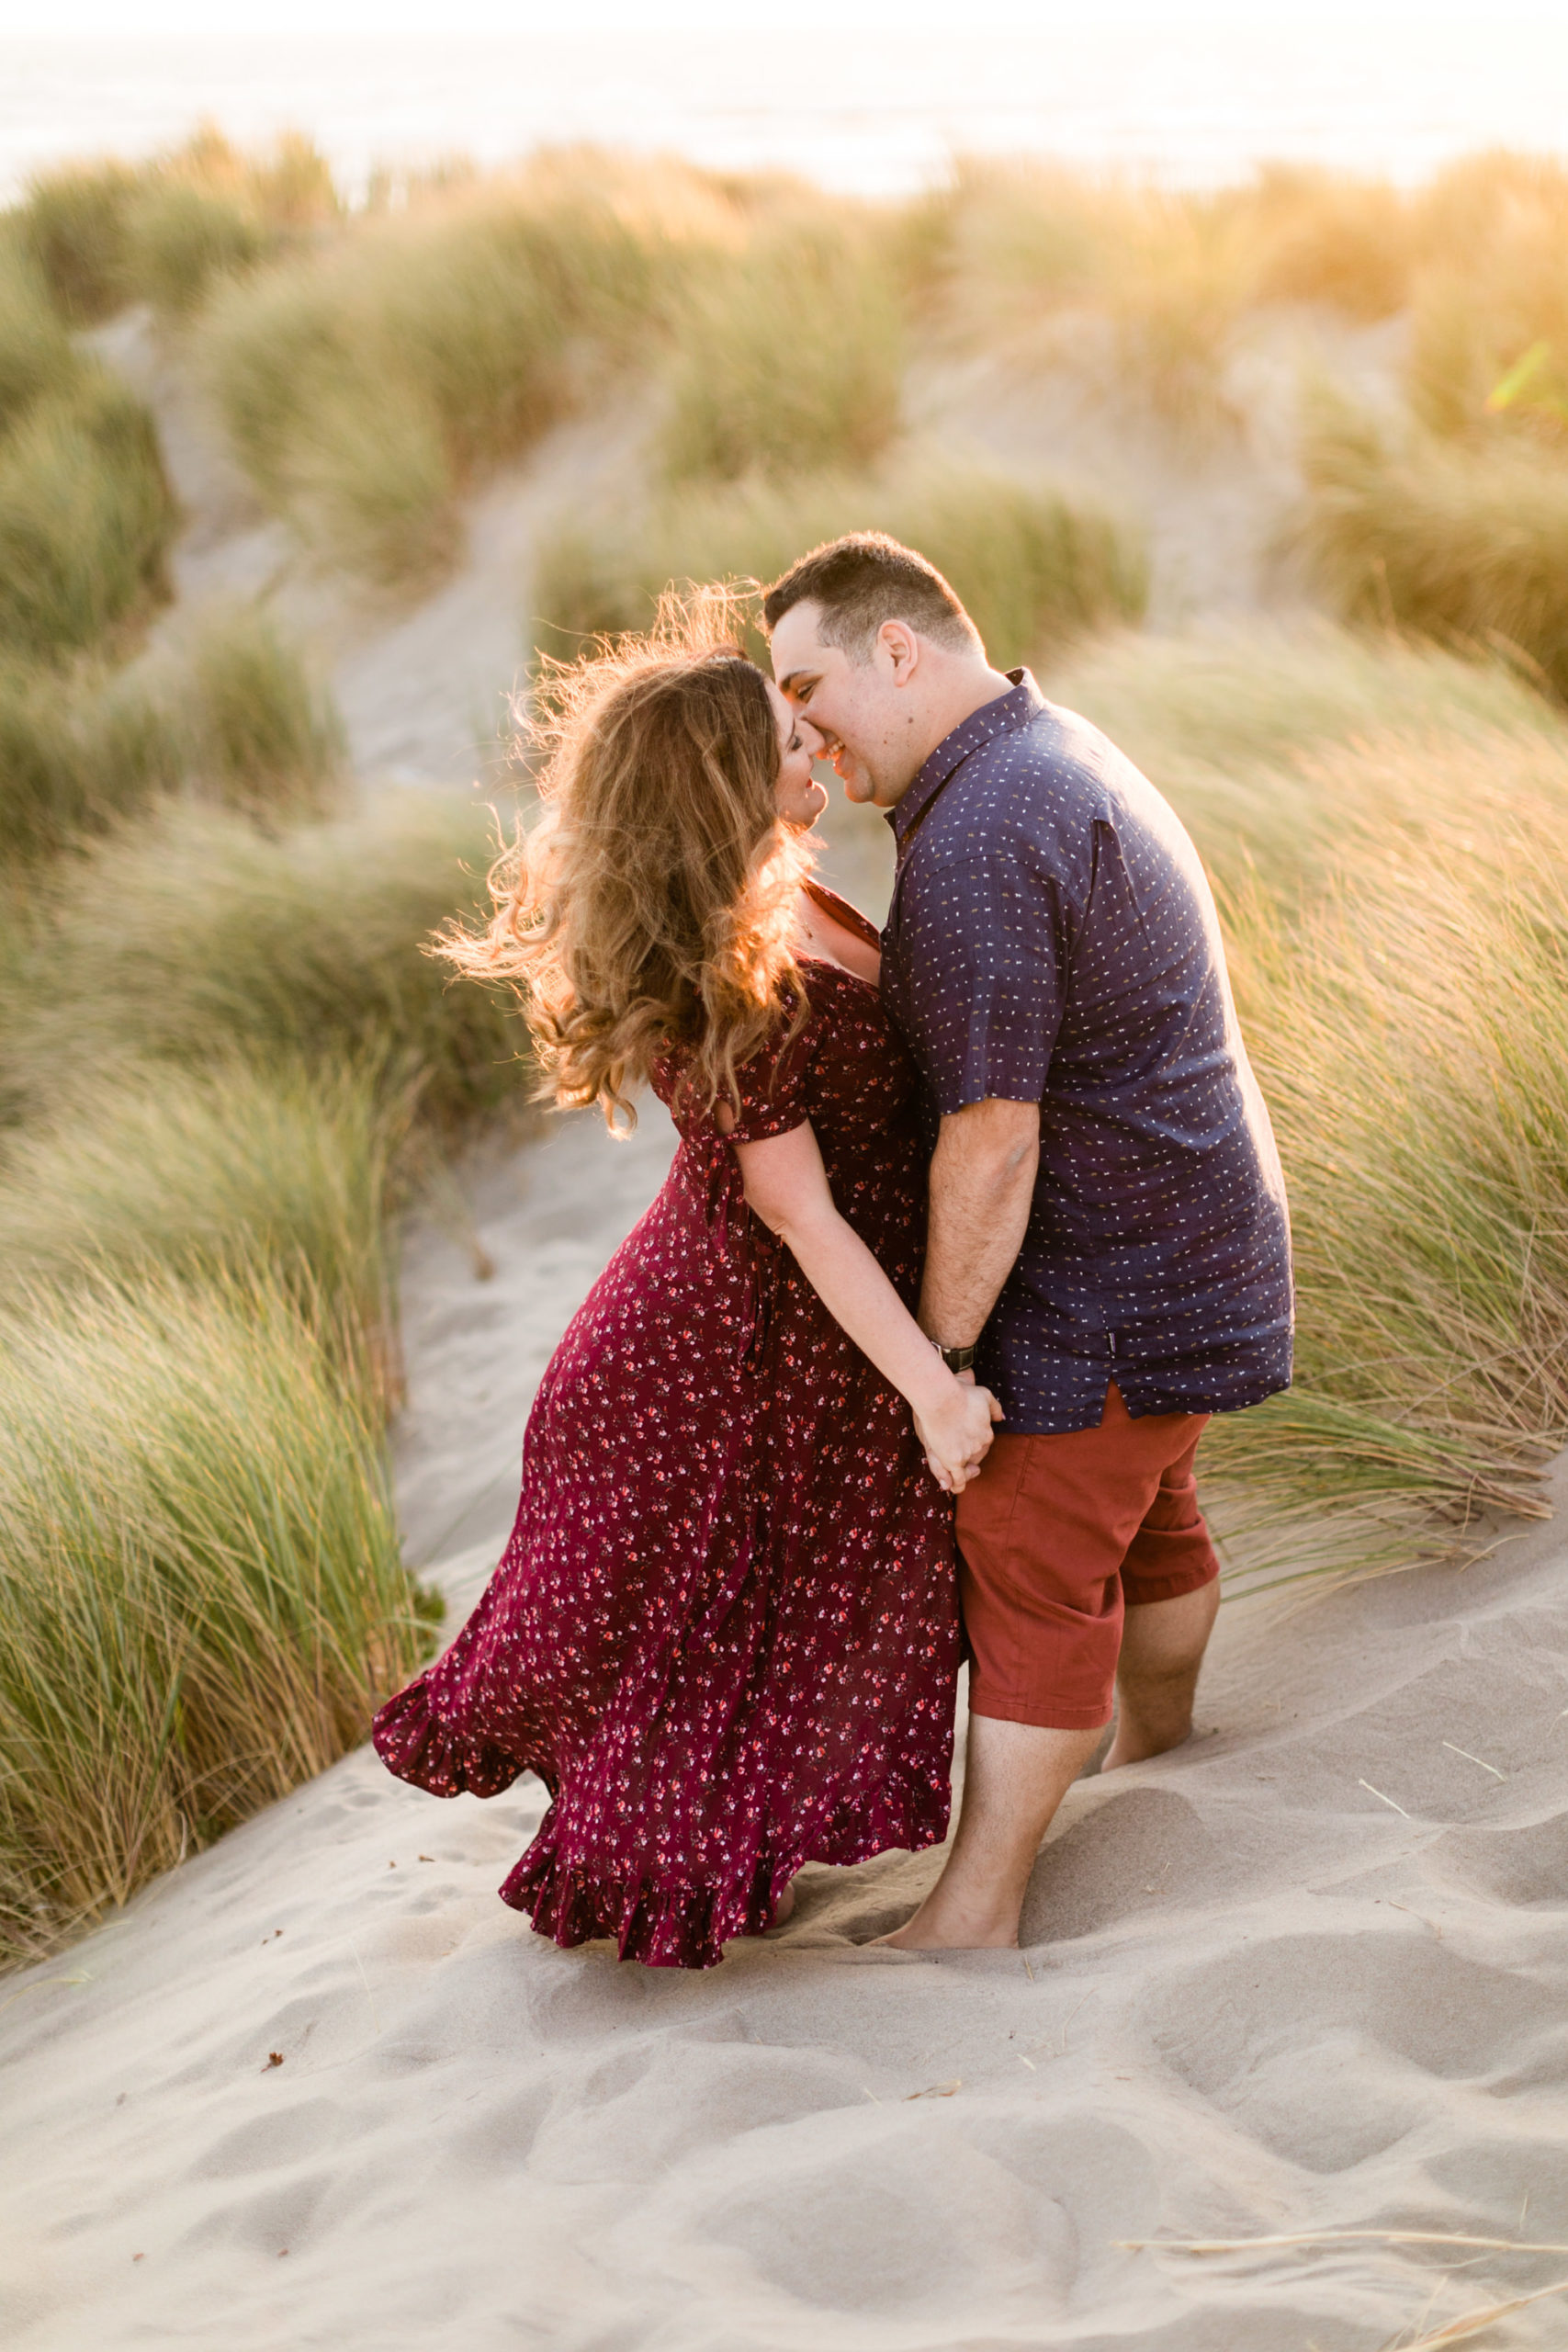 Morro bay rock engagement session by Tayler Enerle